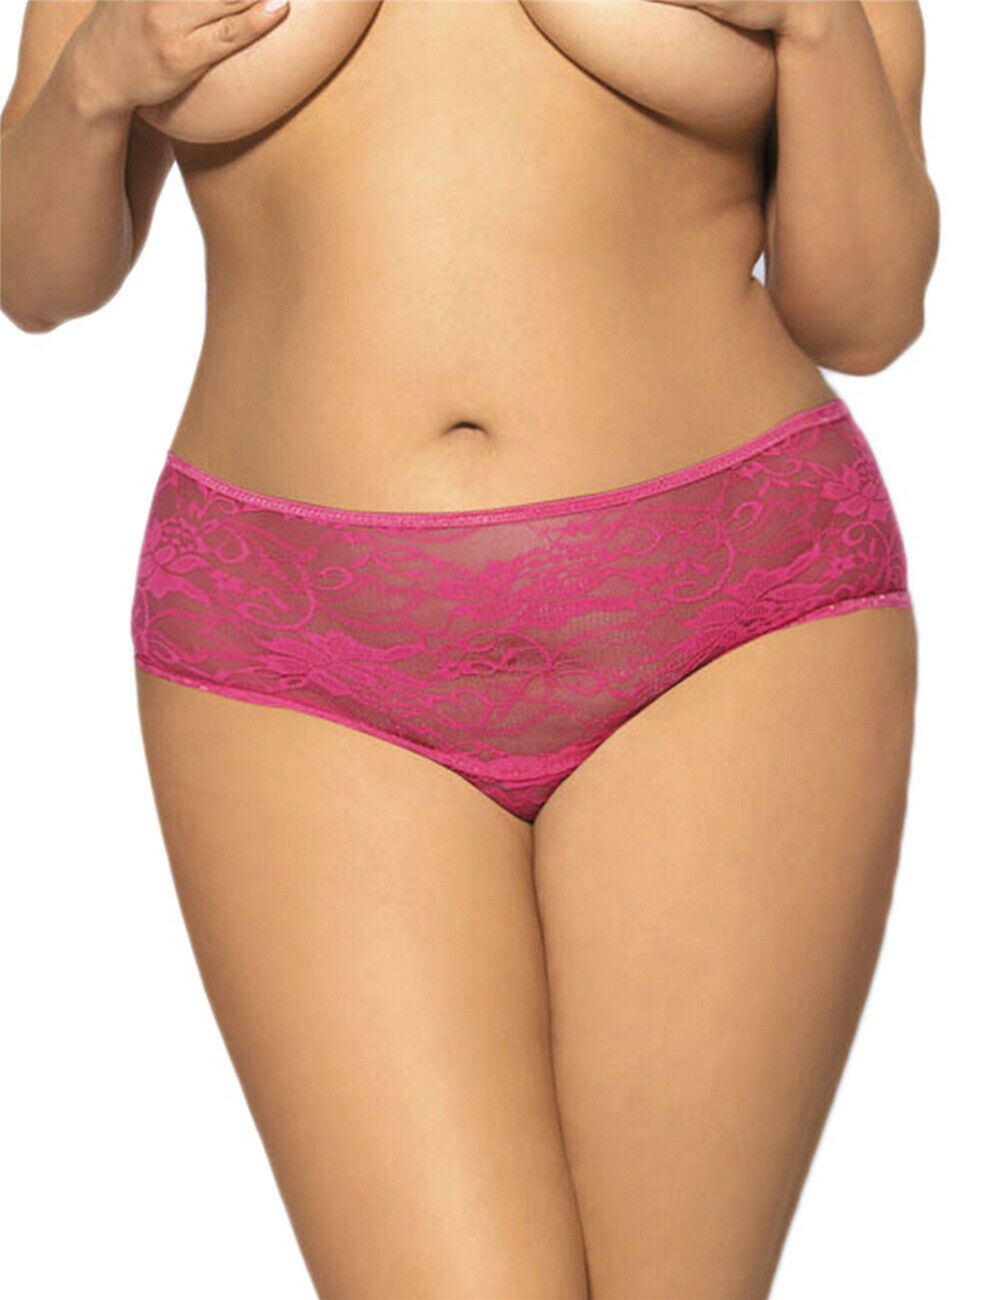 Crotchless Panties Plus Size XL - 6XL Pink French Knickers Open Crotch  Underwear